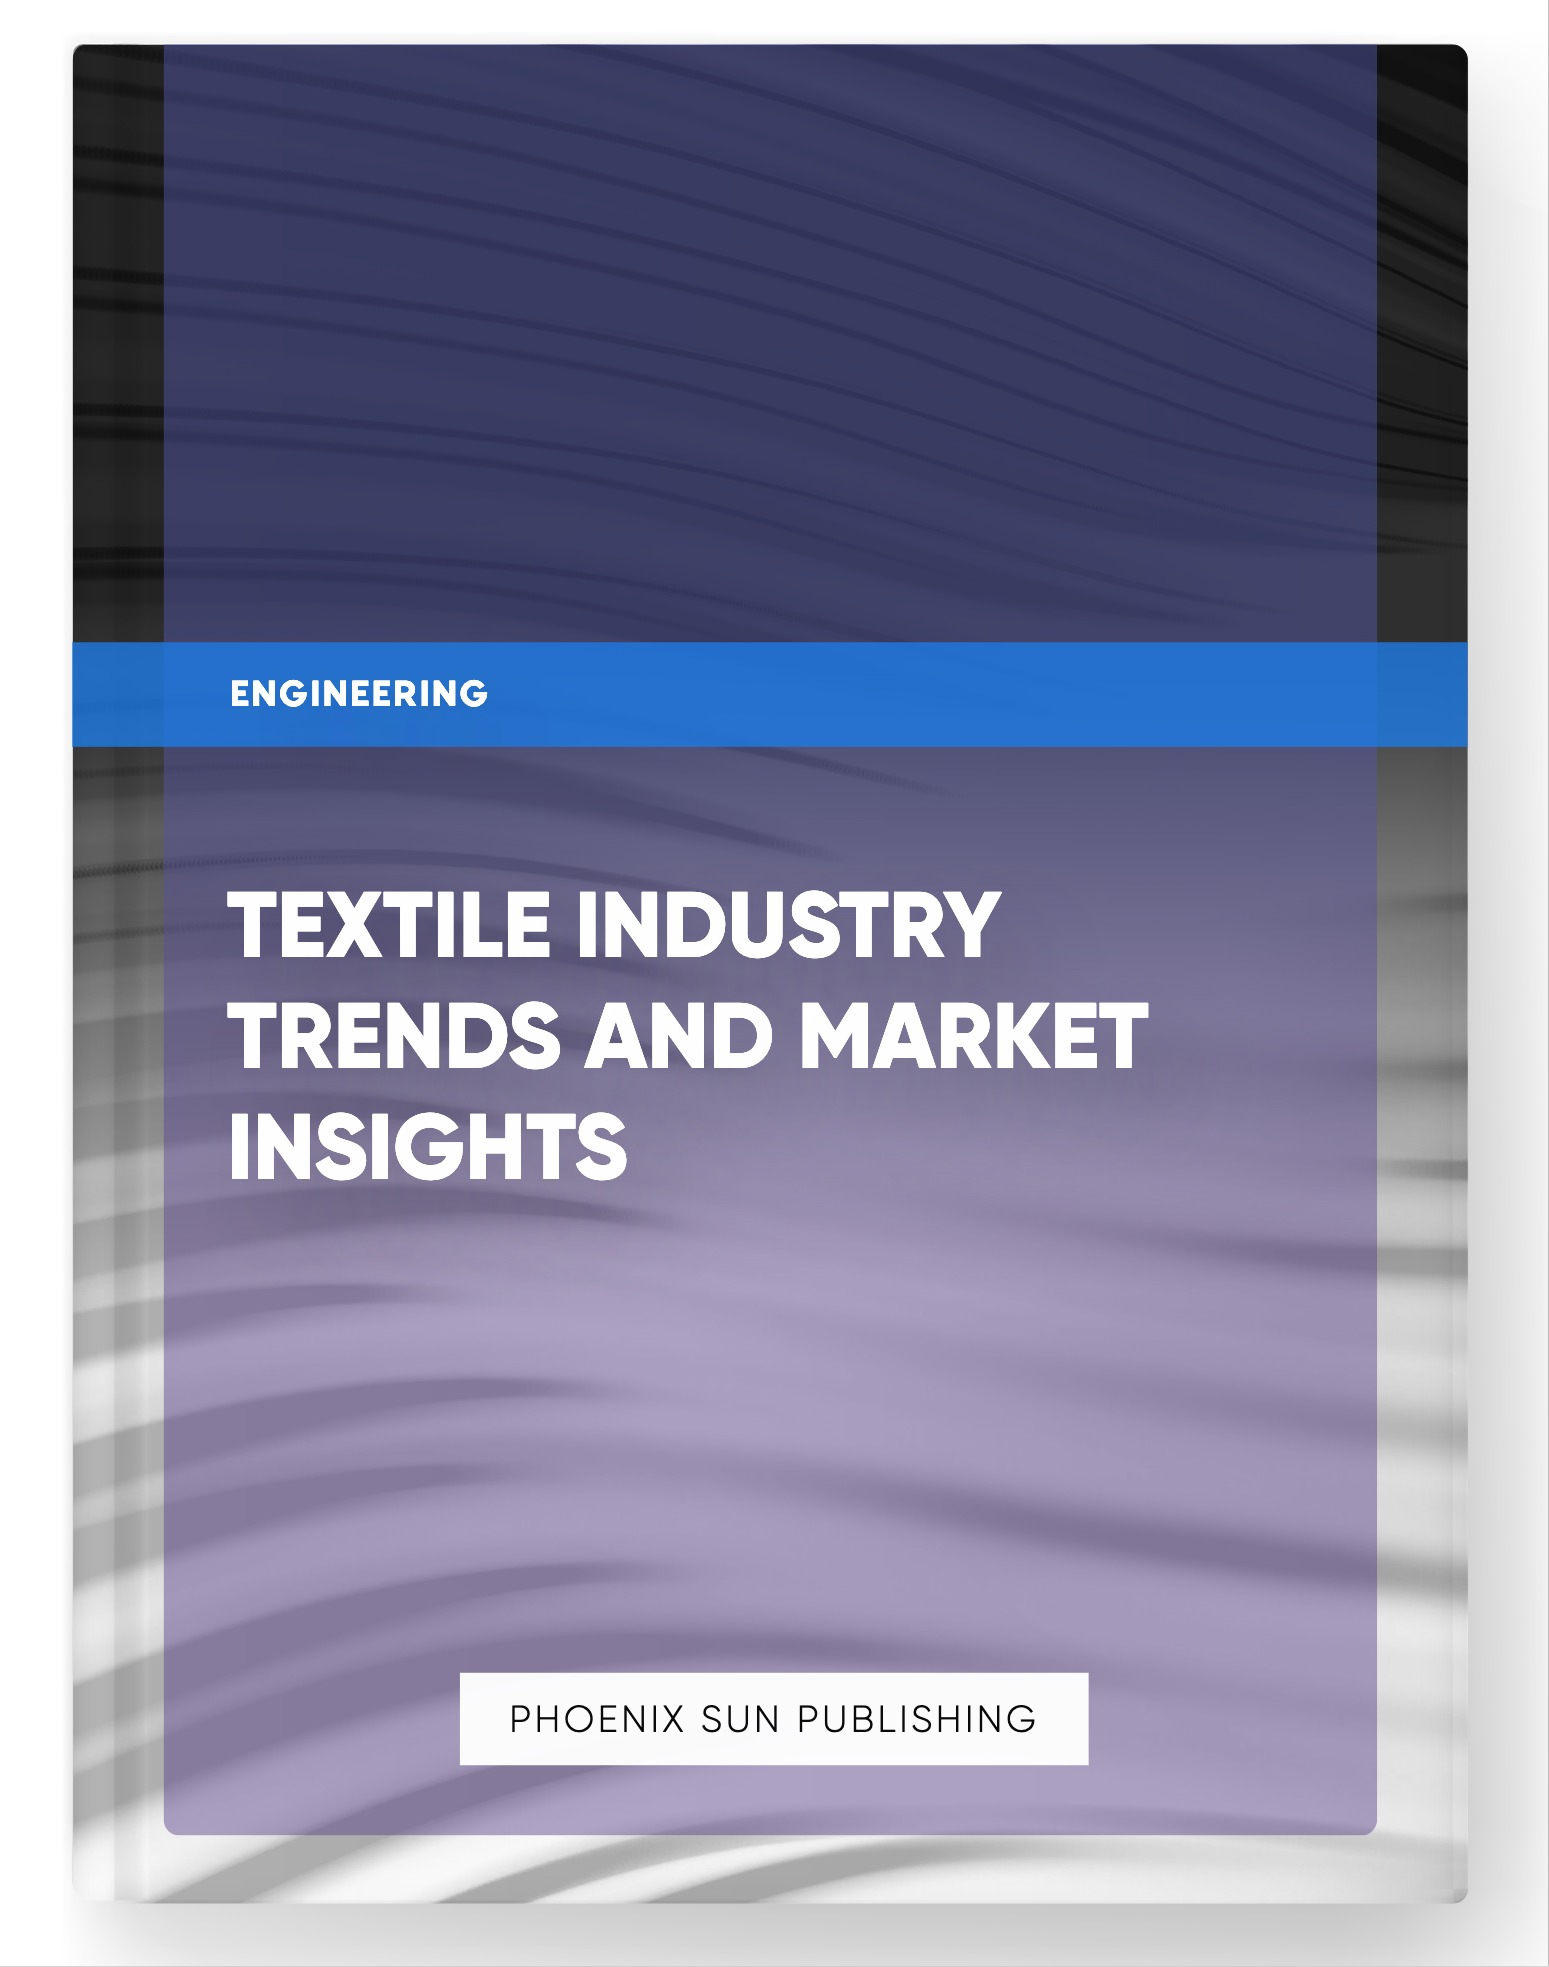 Textile Industry Trends and Market Insights